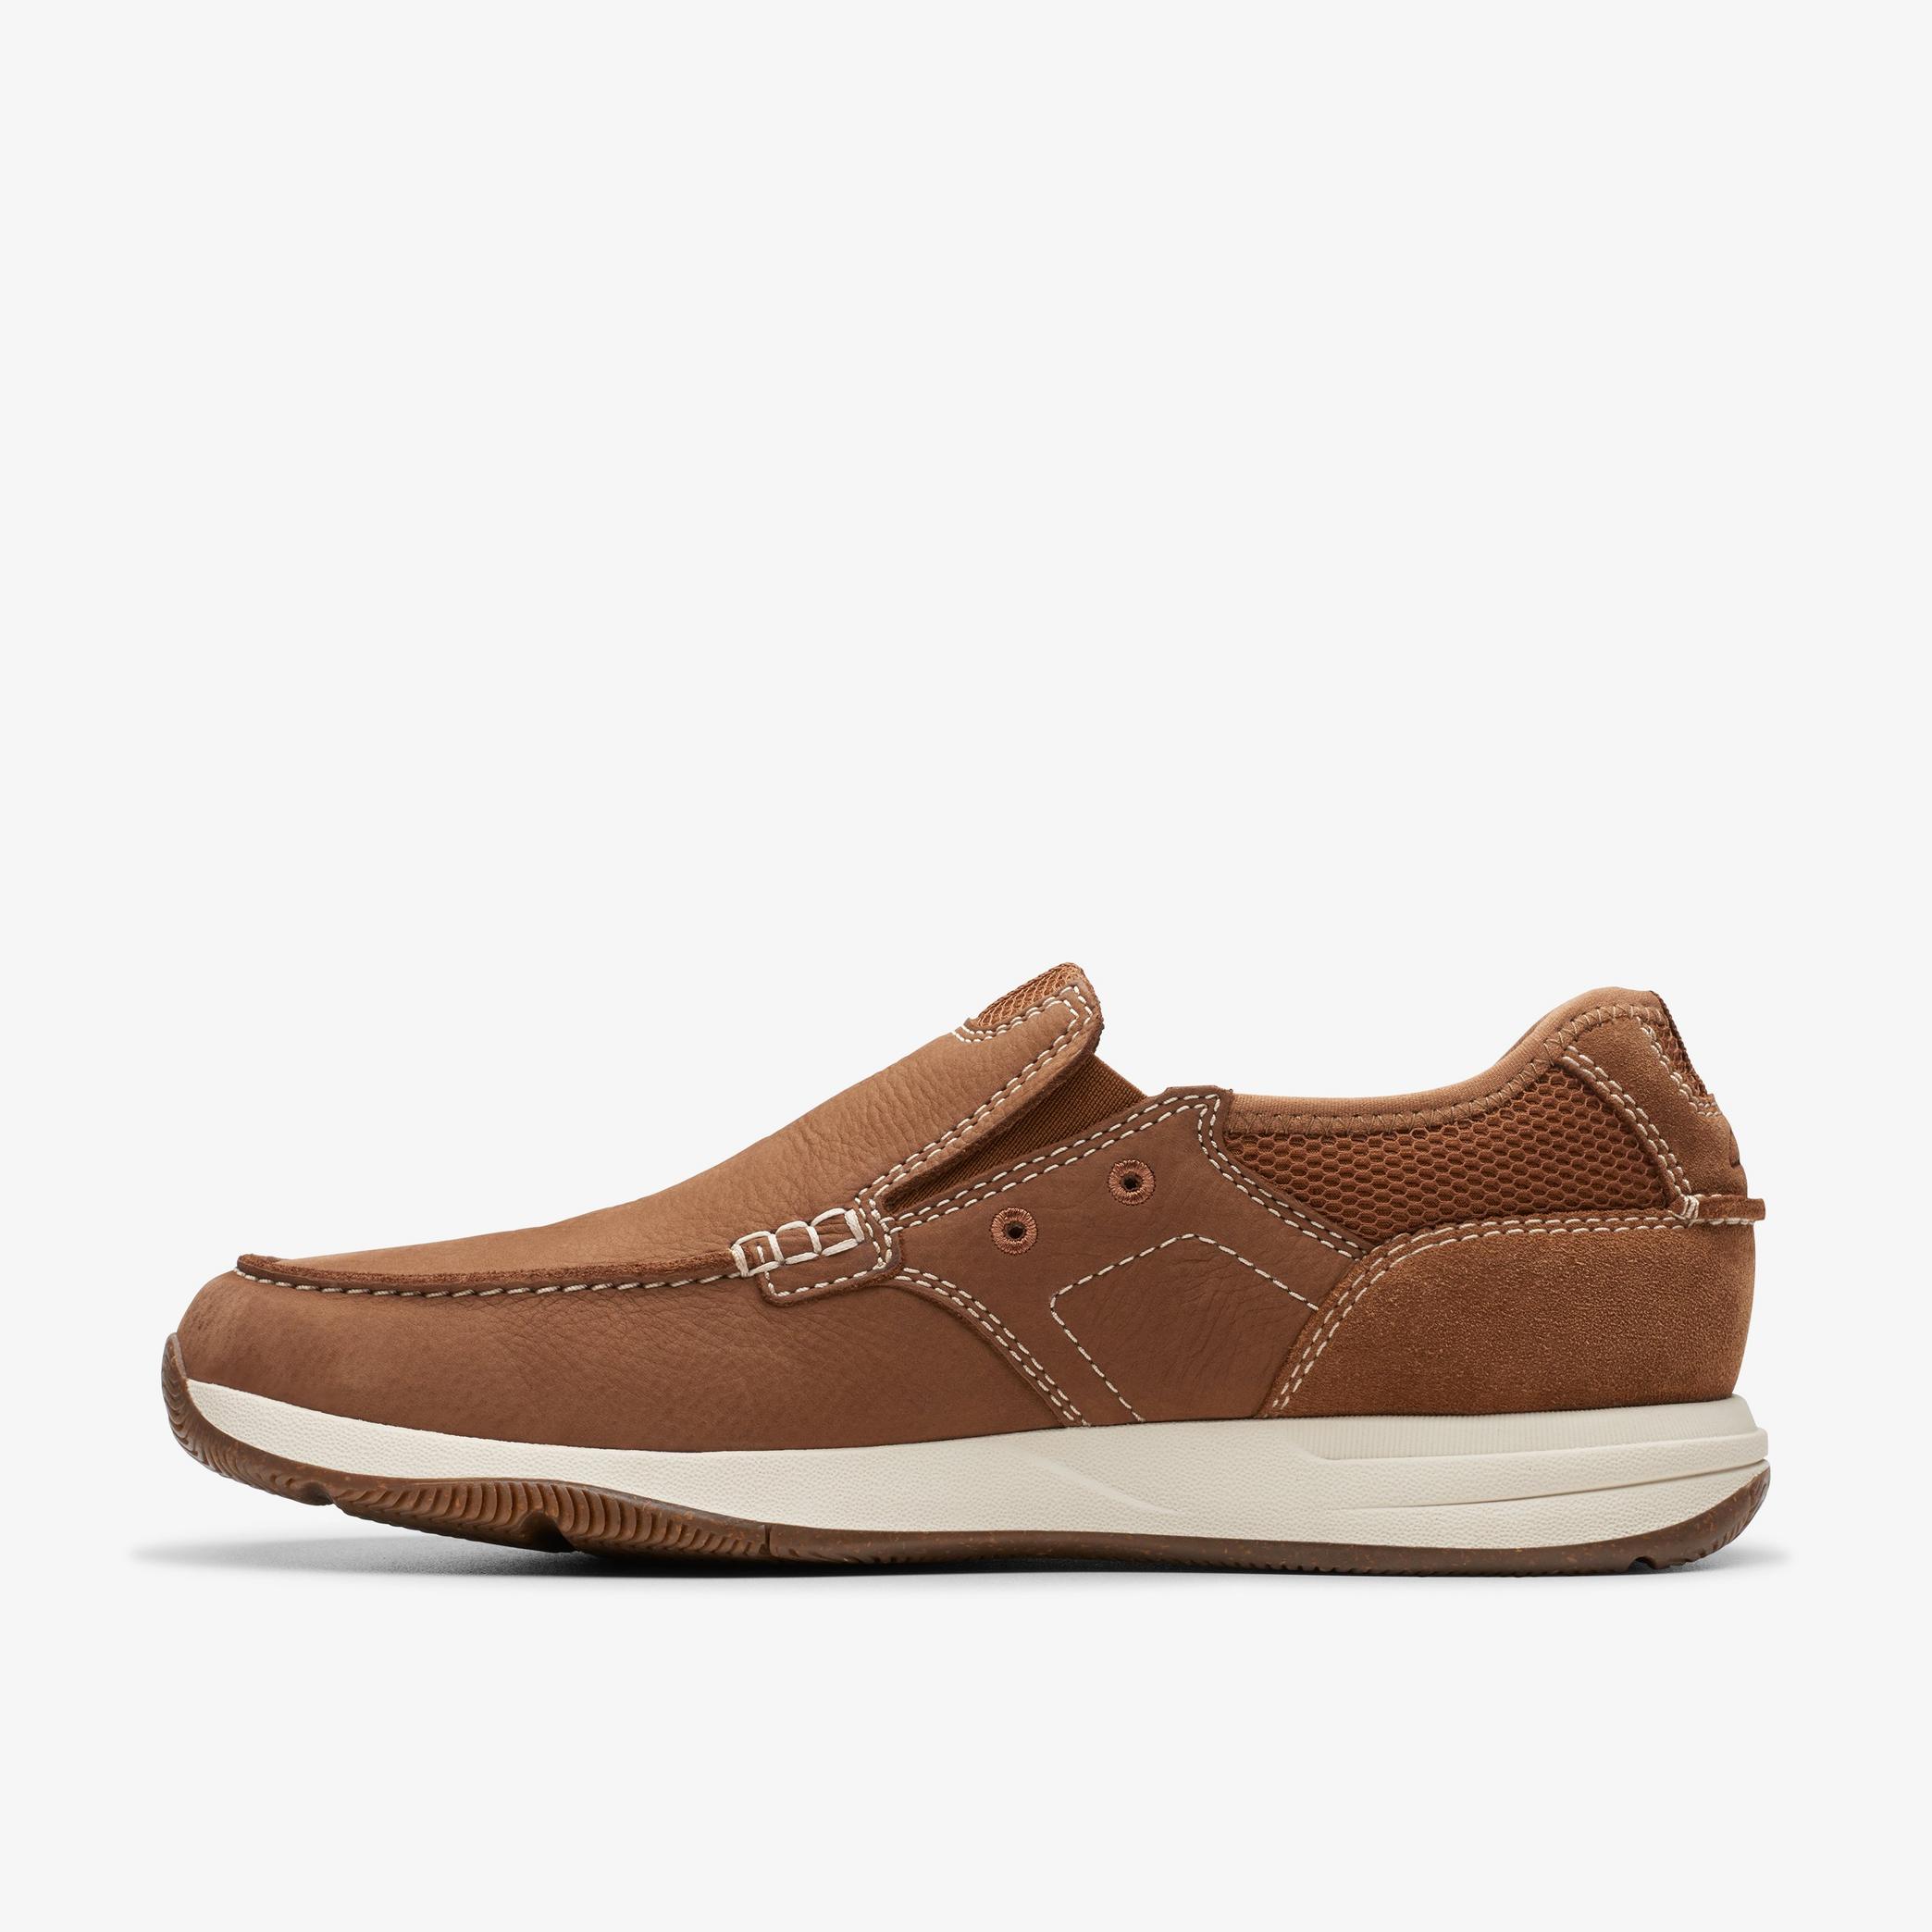 Sailview Step Light Tan Nubuck Boat Shoes, view 2 of 6